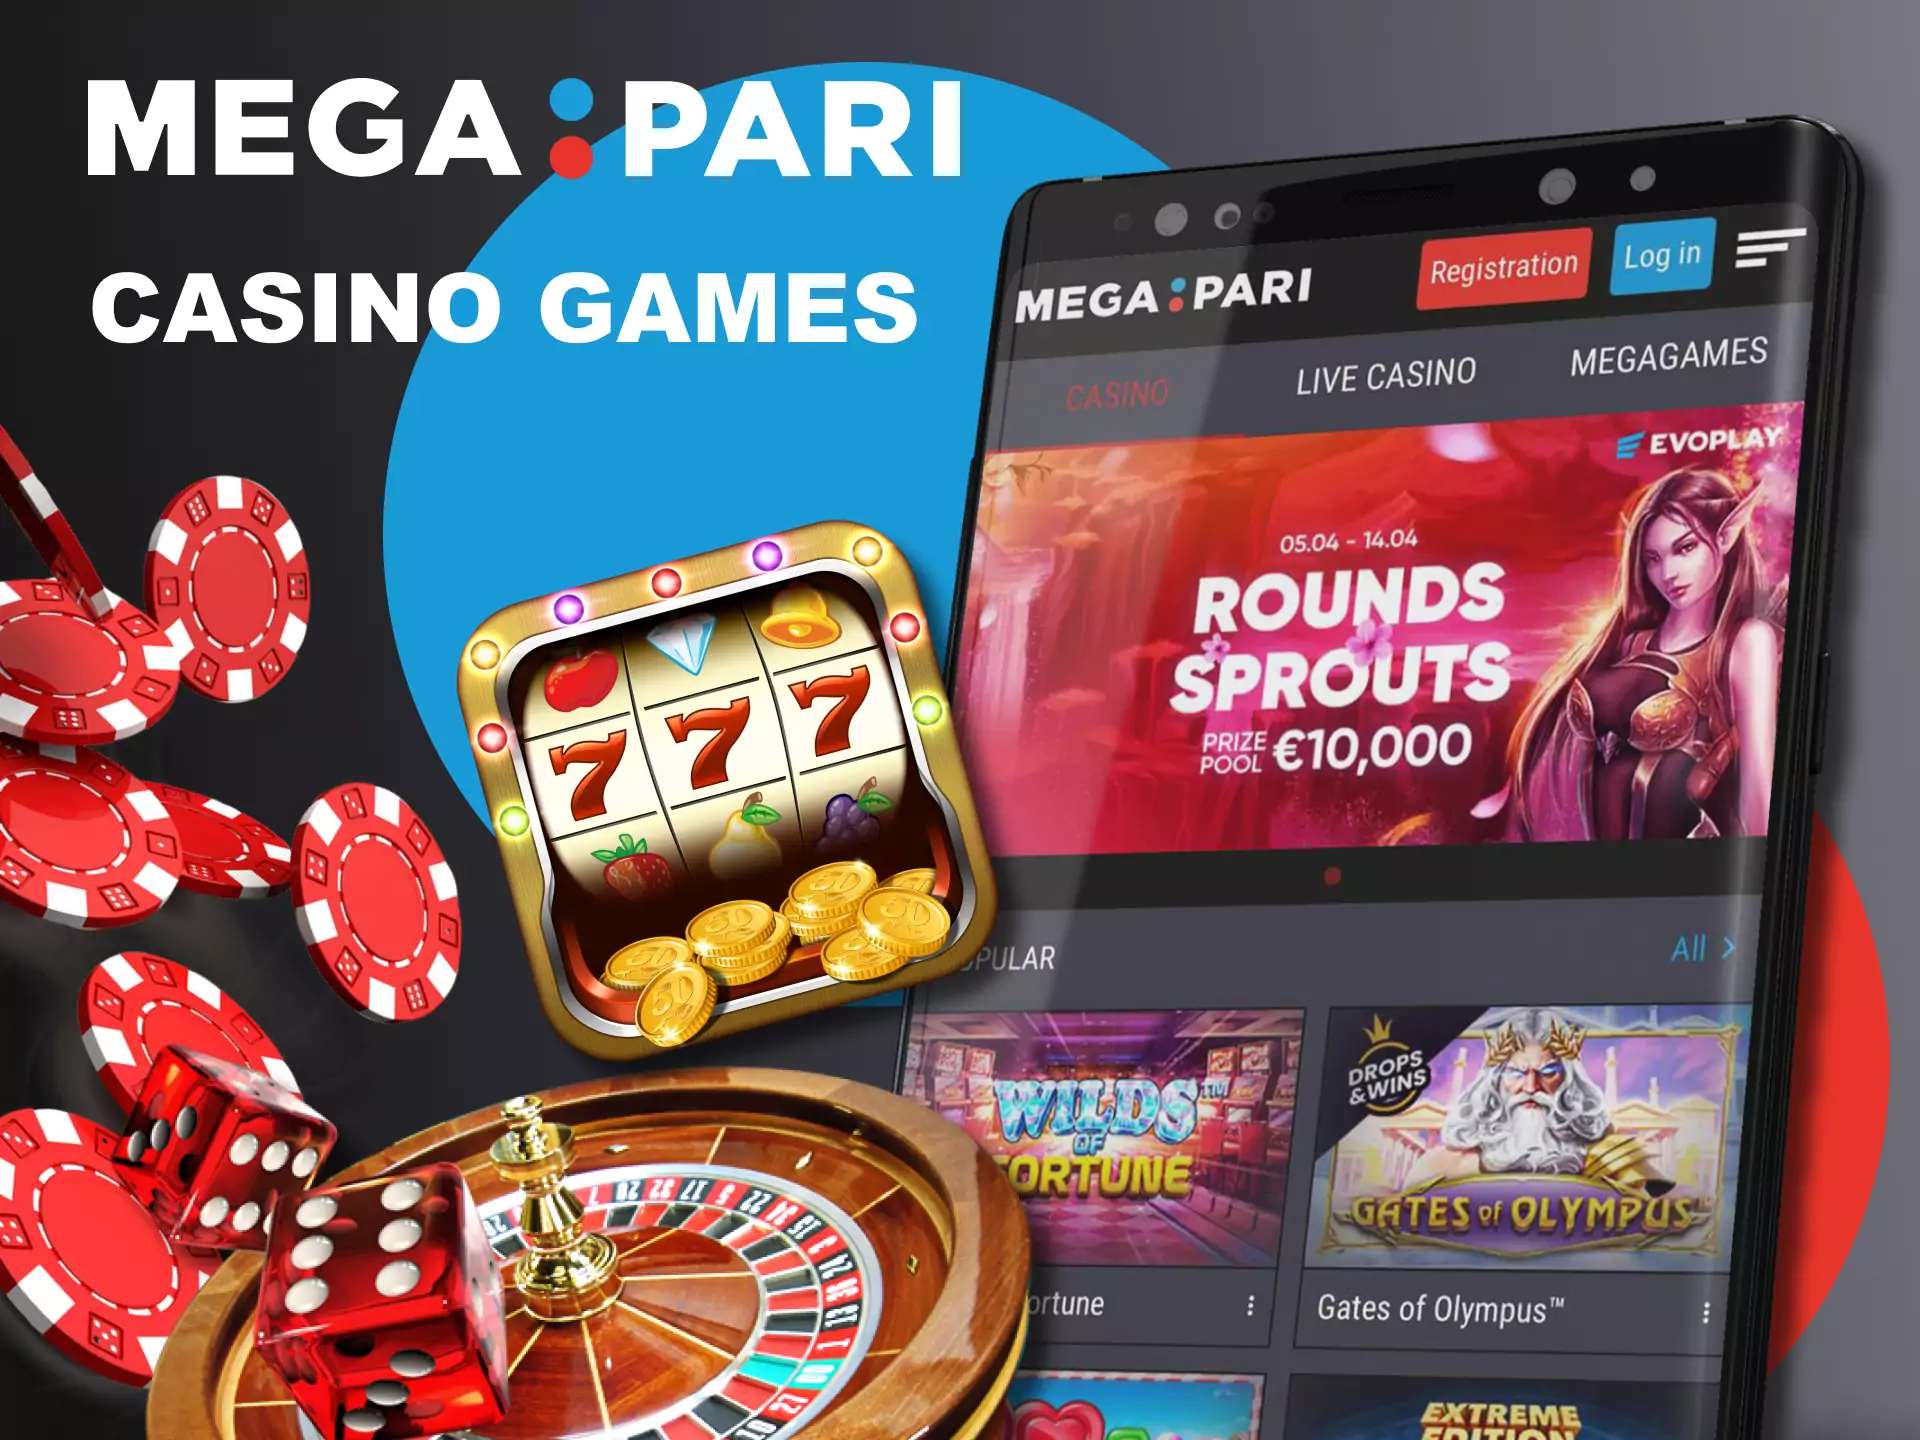 In the Megapari app, go to the casino section and play any games.